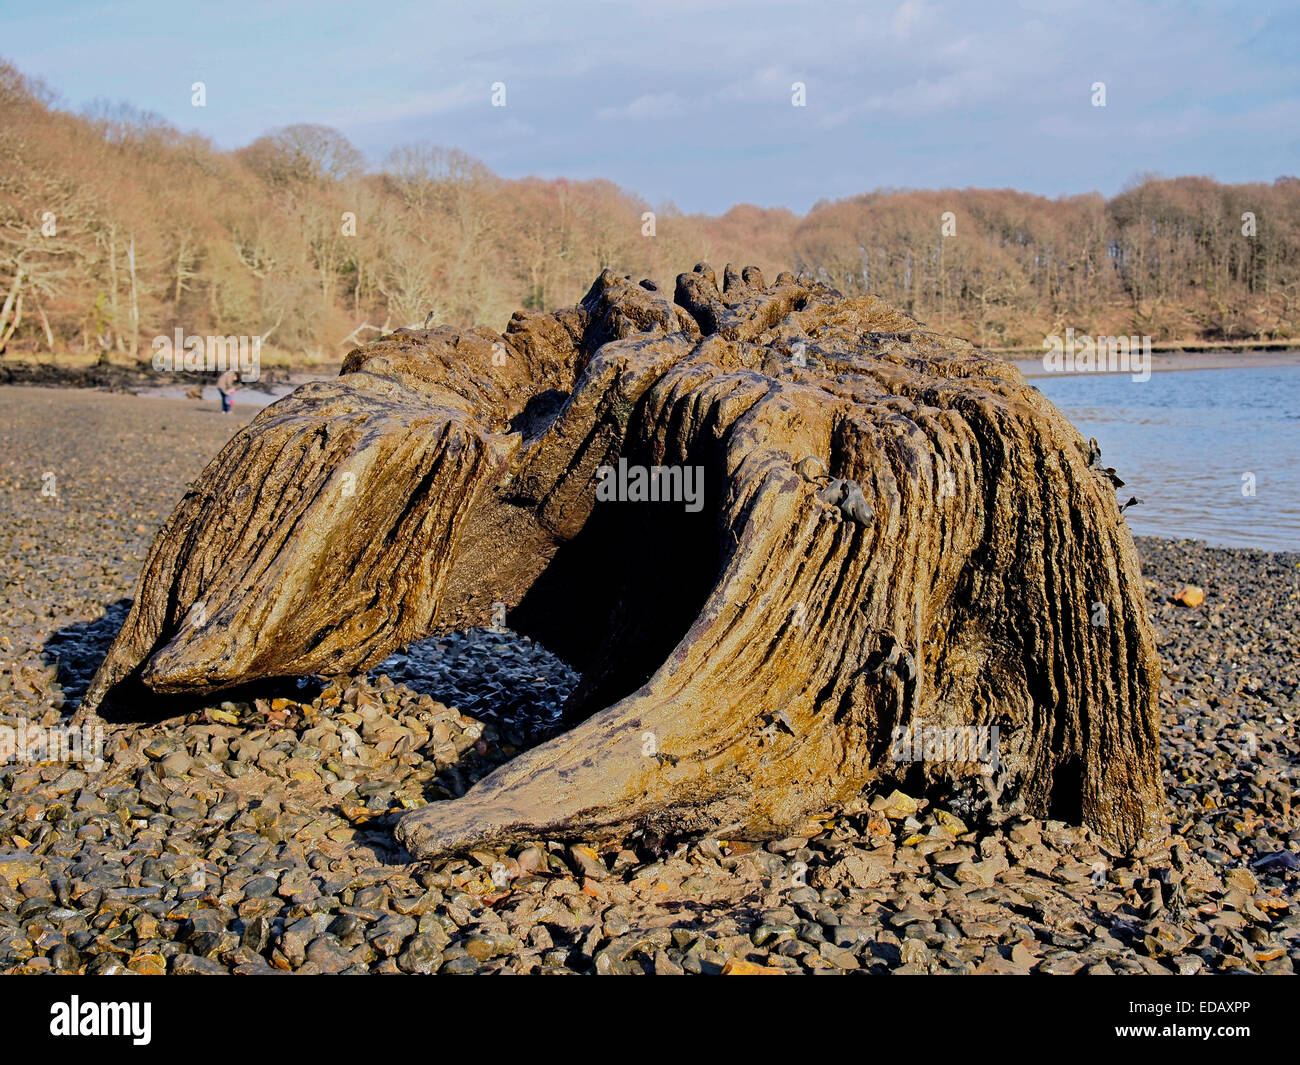 Beached river monster - weathered and eroded tree stump looking like a primeval creature on the muddy foreshore of the Hamble R. Stock Photo